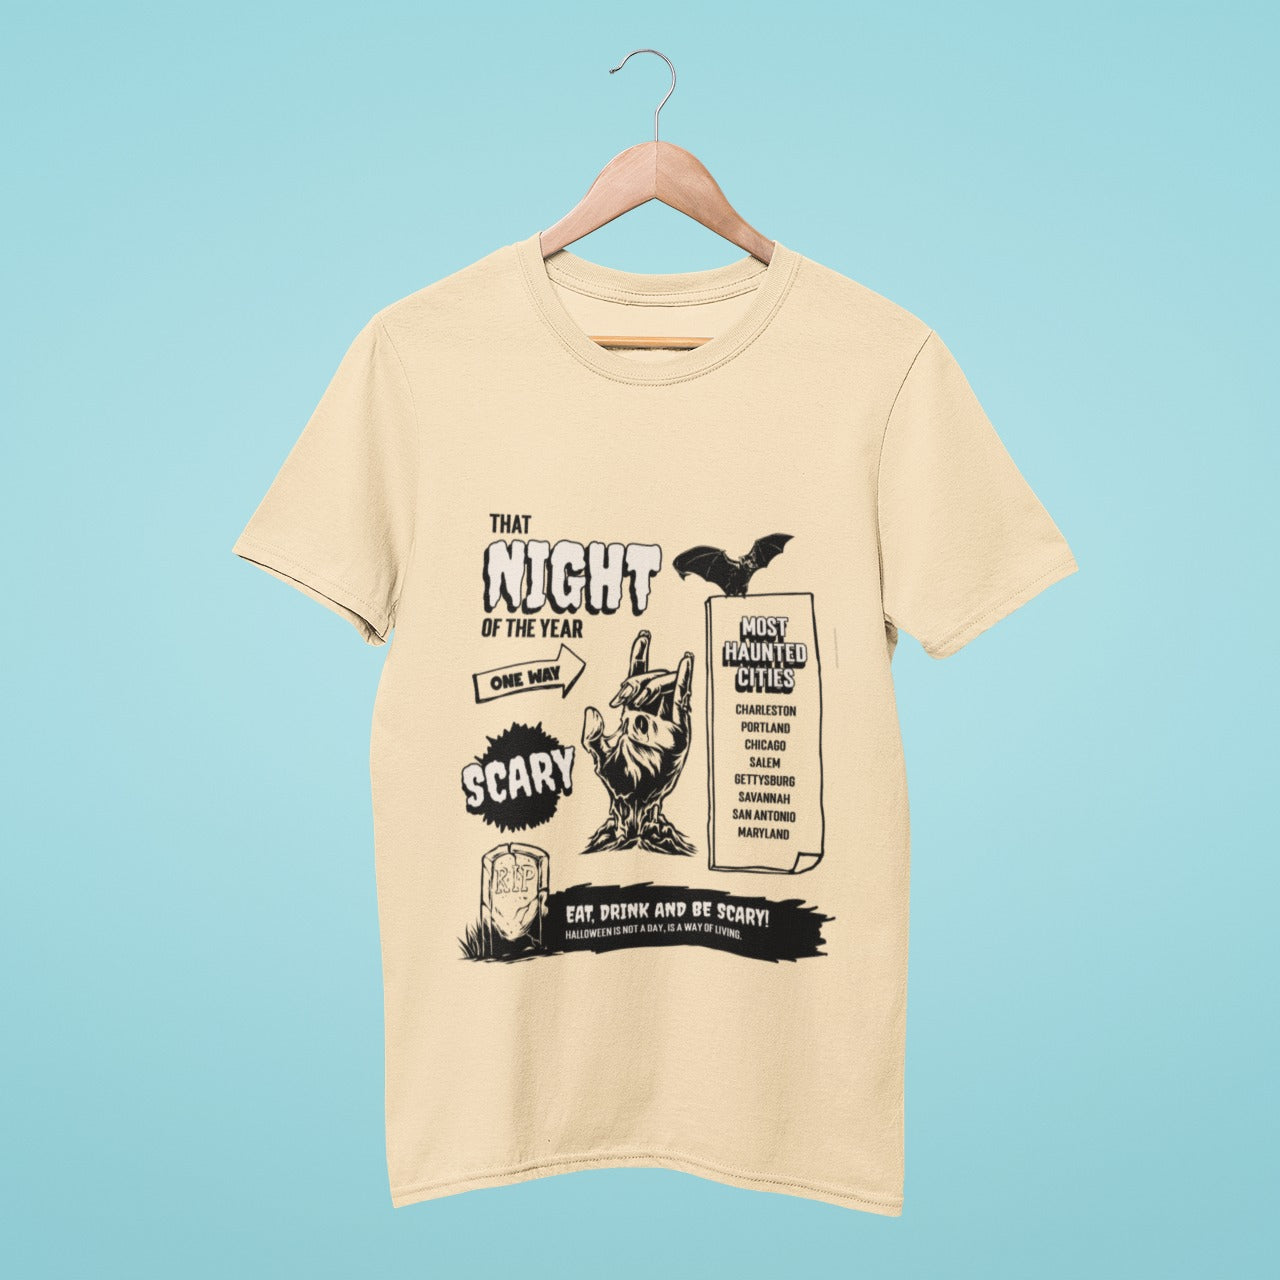 Unleash your spooky side with this beige t-shirt, featuring a chilling list of scary cities, a tombstone that reads "Eat, Drink and be Scary, Halloween is not a Day, it's a way of living," and a zombie hand. Perfect for Halloween or any horror-themed occasion. Get ready to scare and be scared in style.